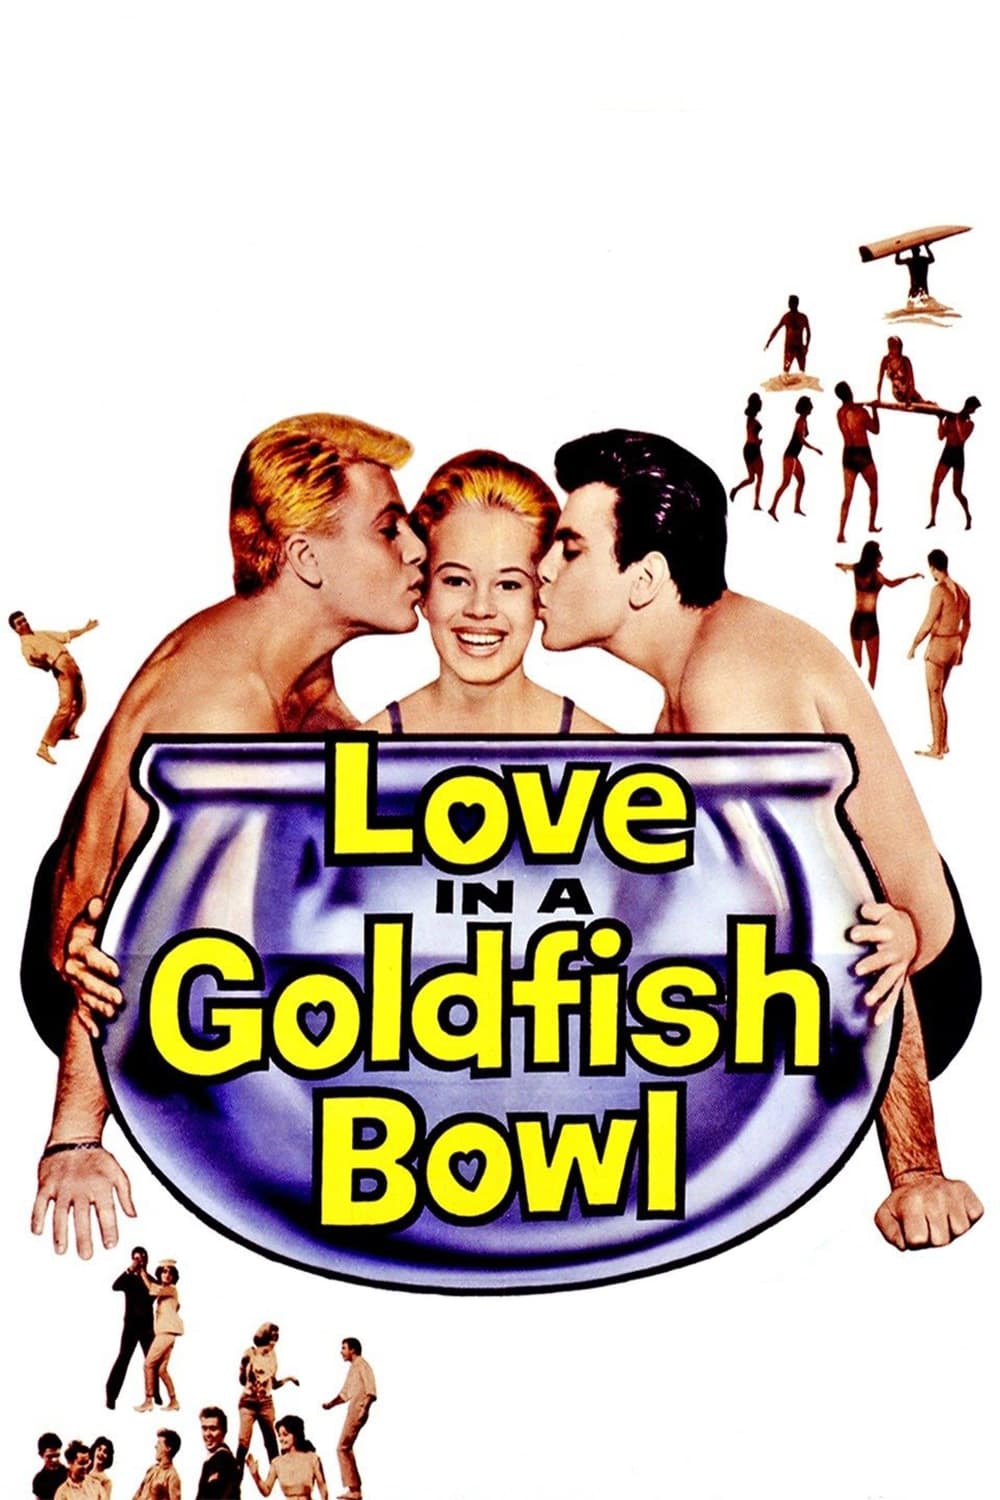 Love in a Goldfish Bowl (1961)